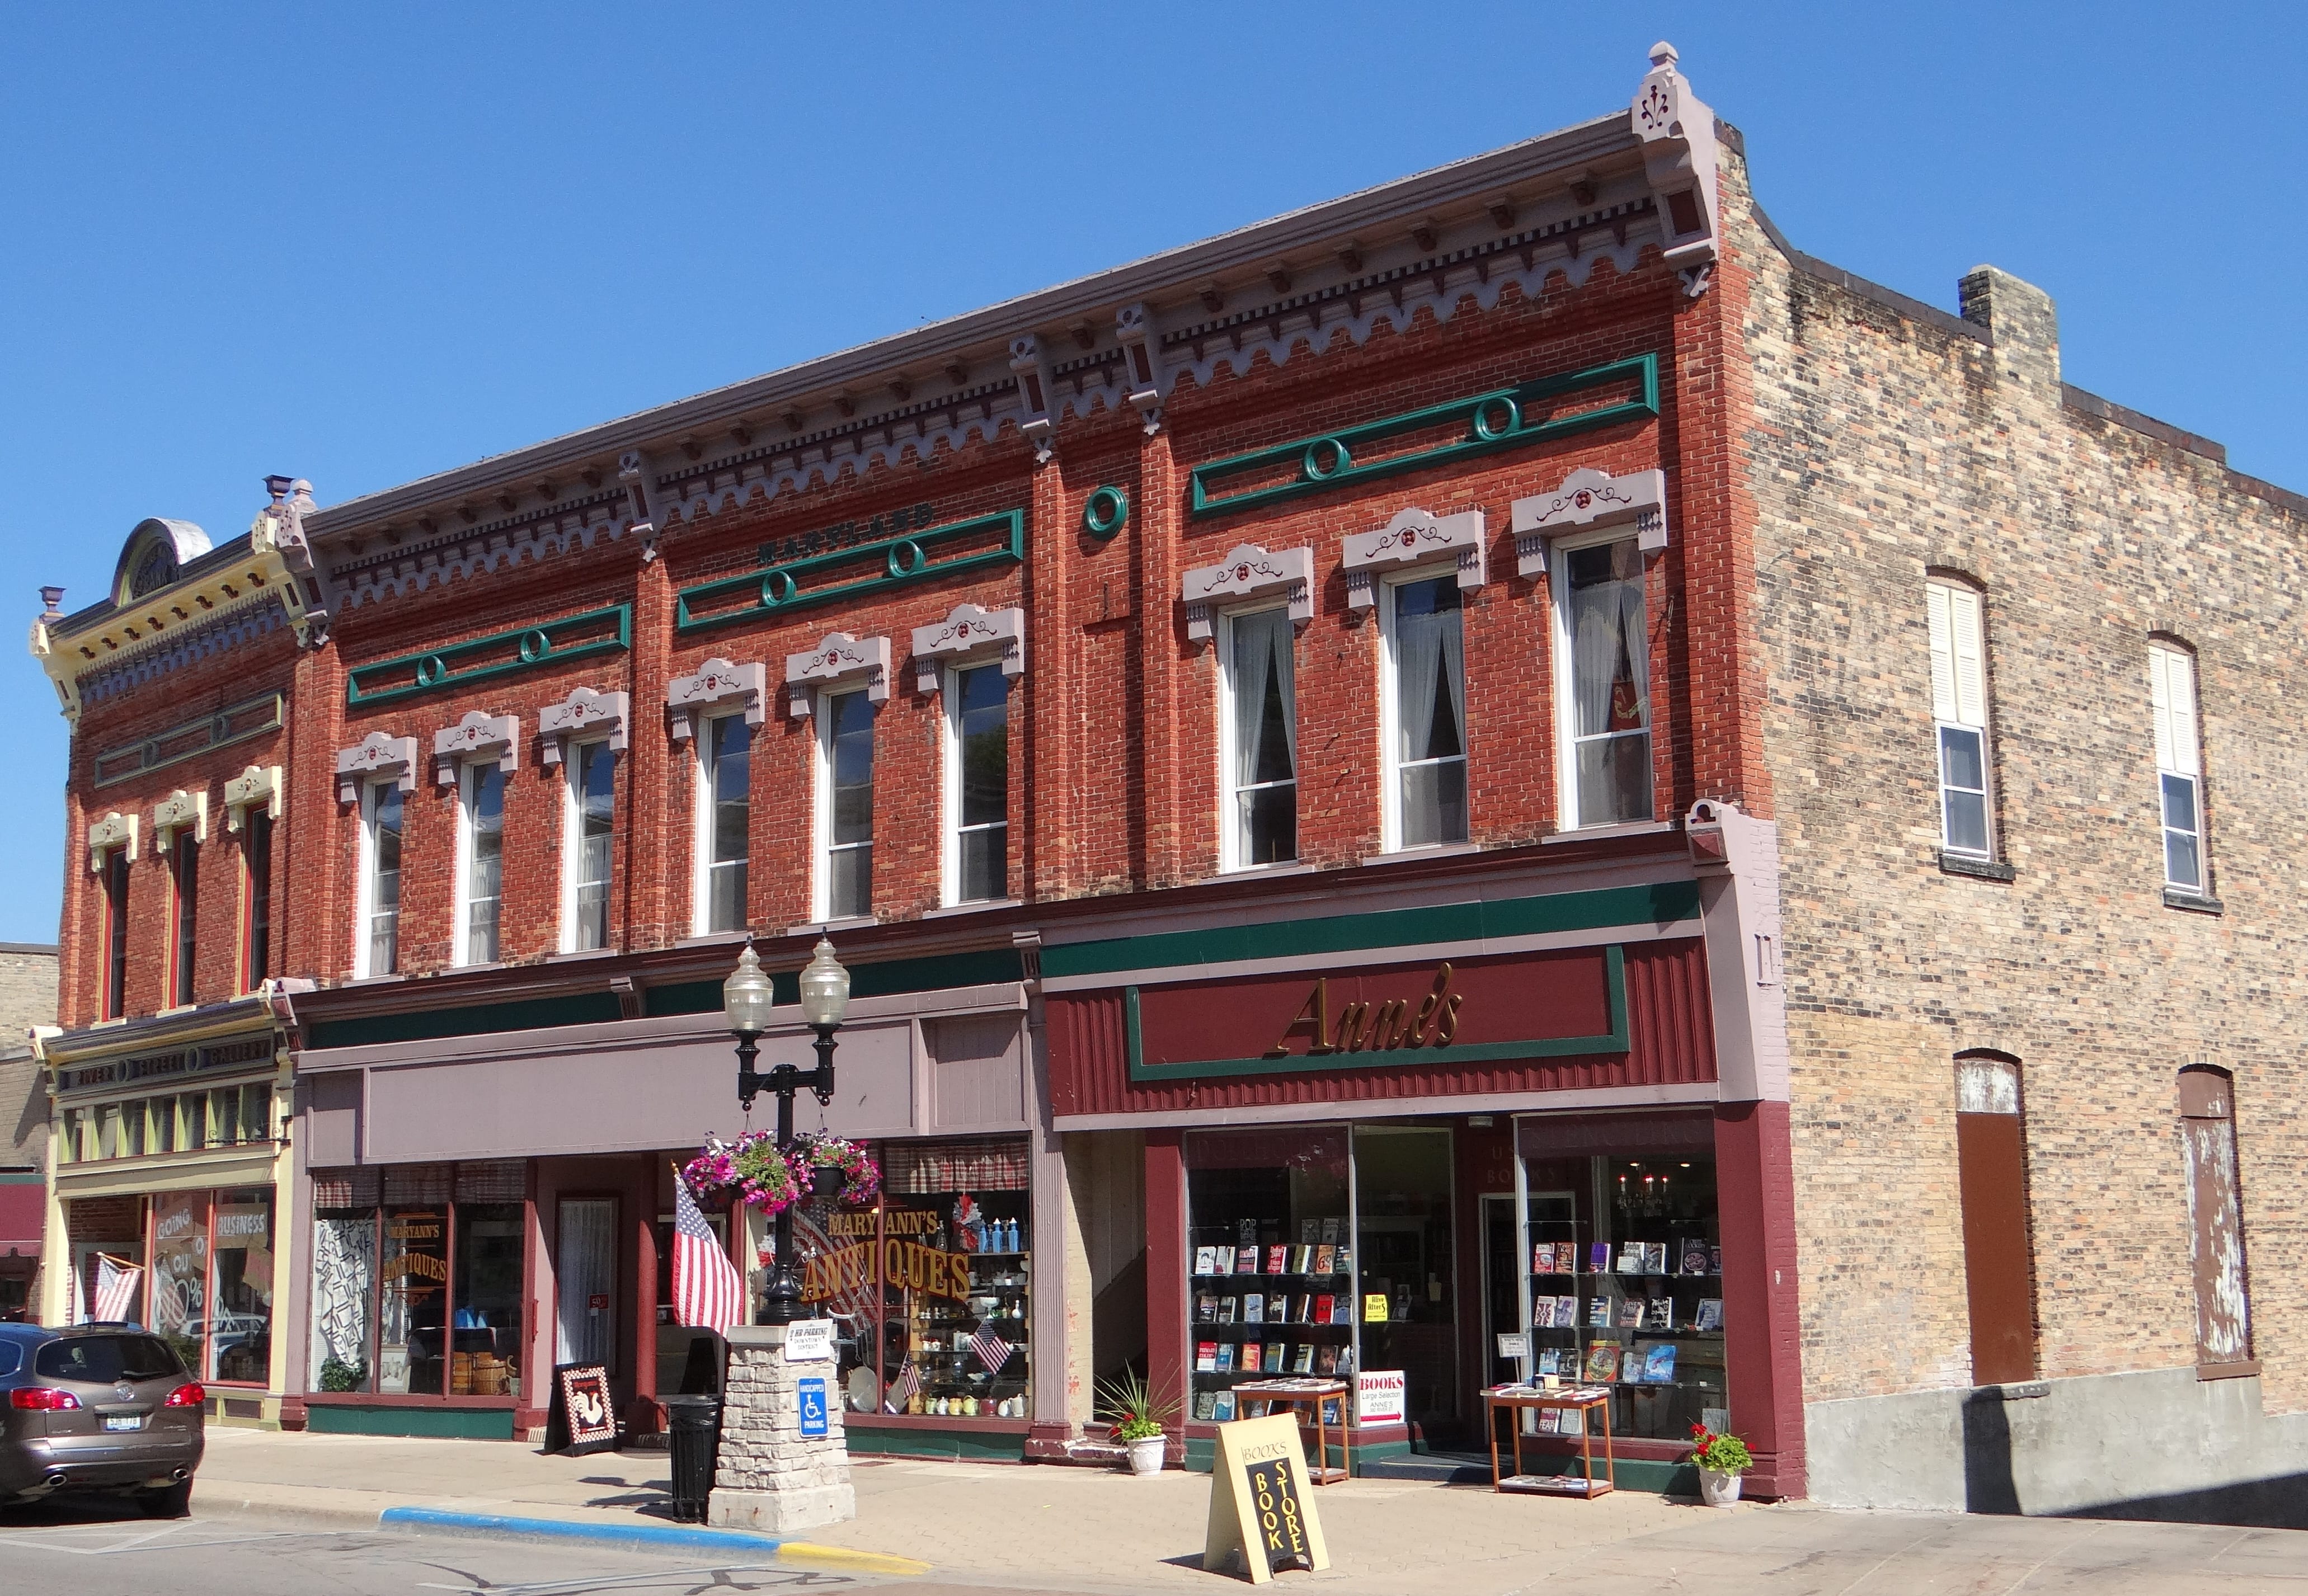 A row of two-story brick storefronts with a historic, small-town look.